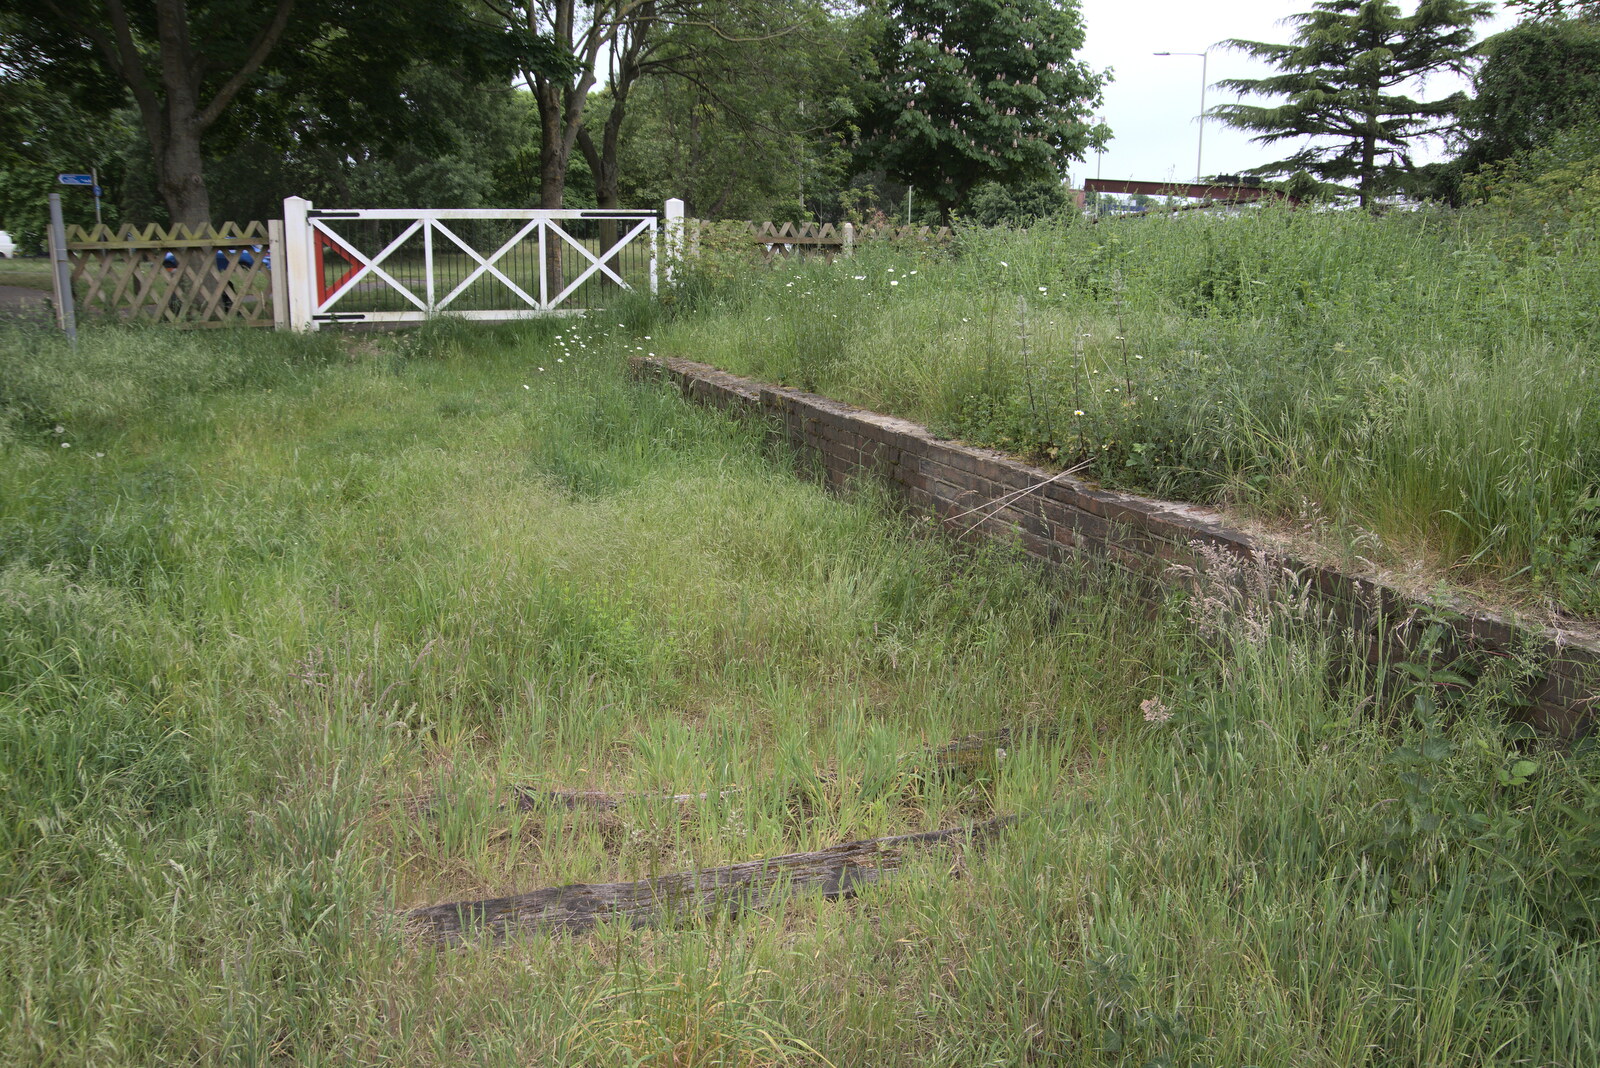 Another view of the remaining platform from Discovering the Hidden City: Norwich, Norfolk - 23rd May 2022